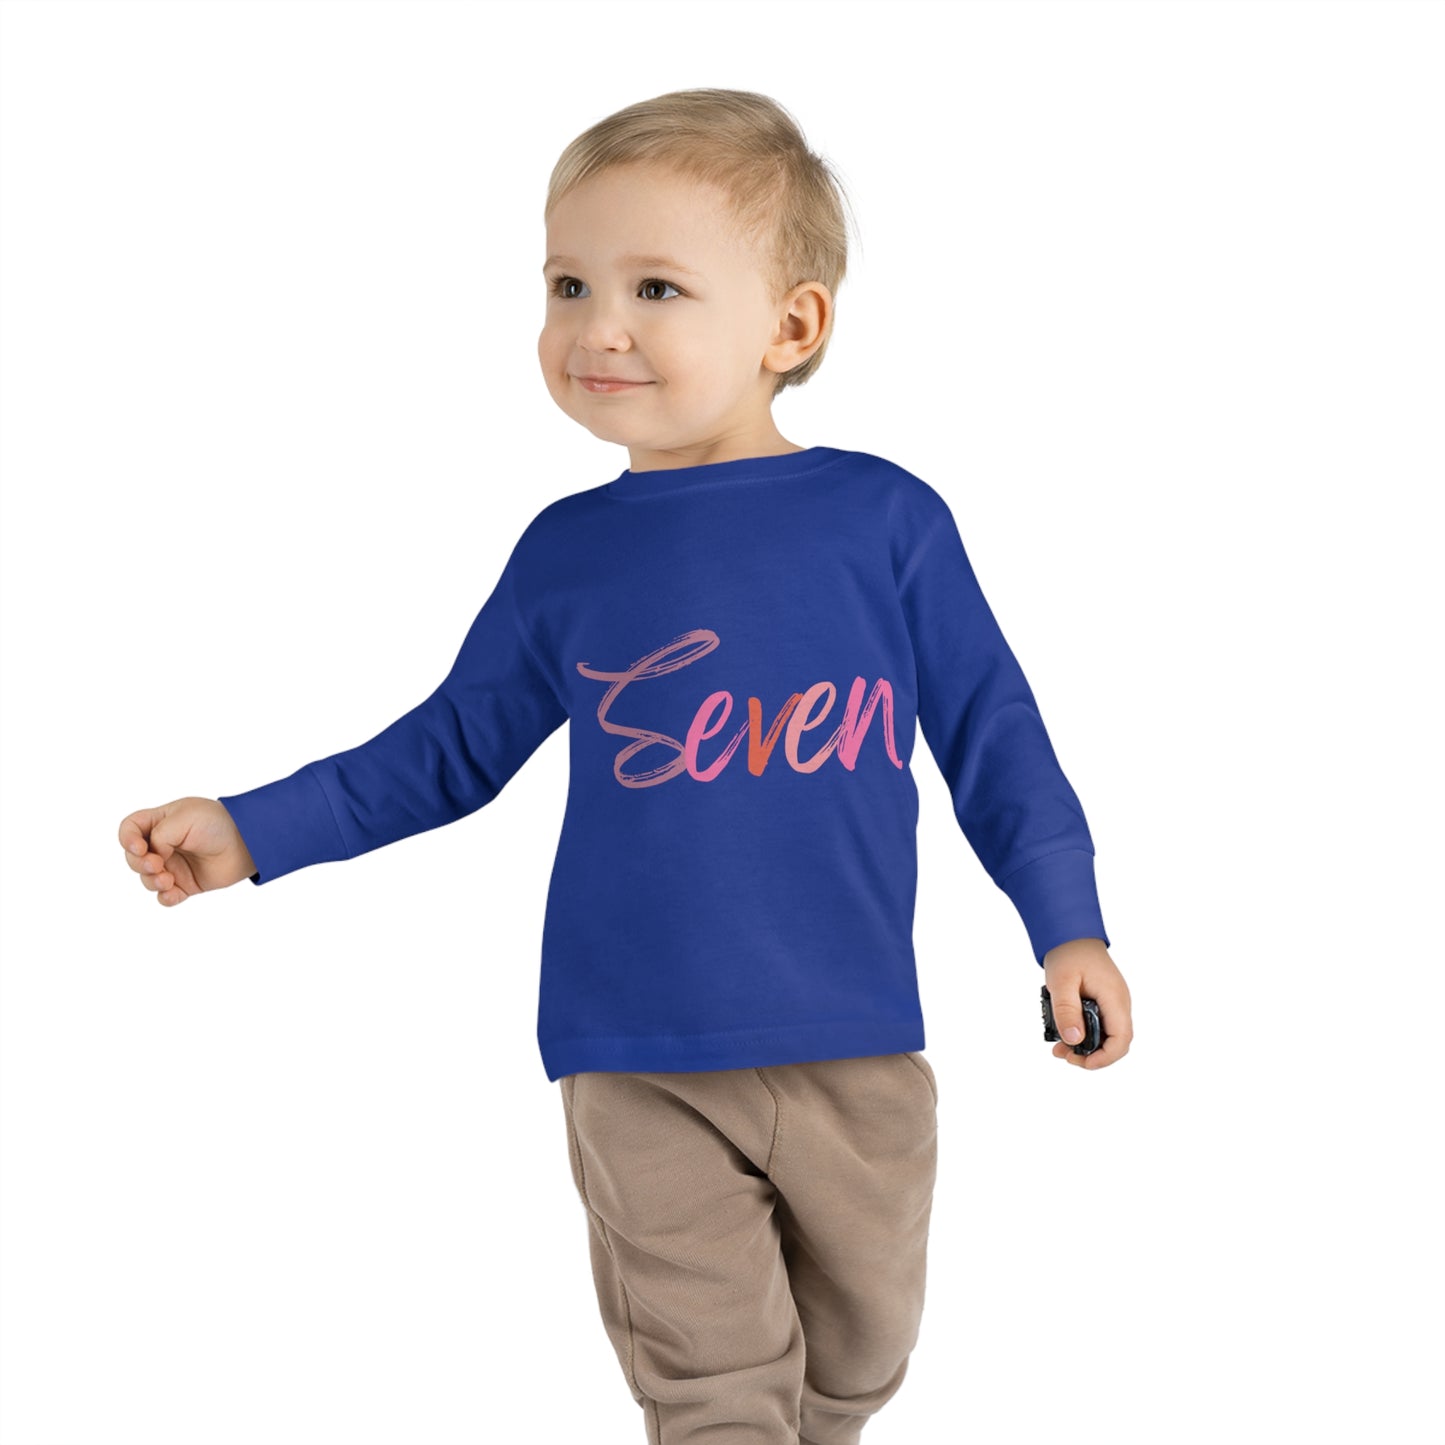 Long Sleeve Age Tee Shirt For 7-year-old Unisex Kids